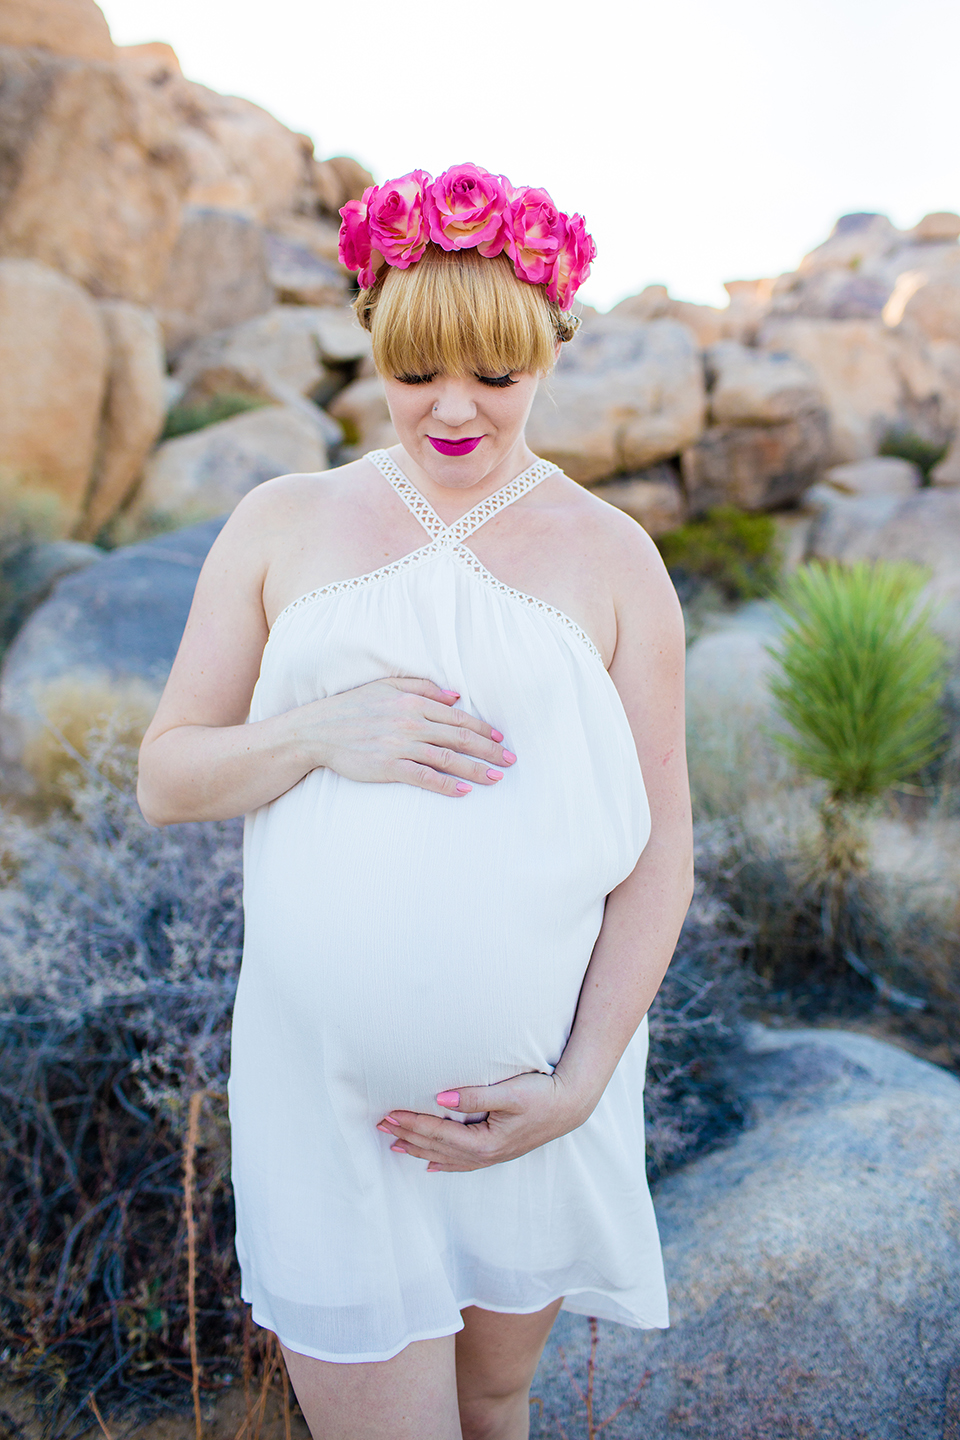 Air Maternity of a woman with a flower tiara on the head